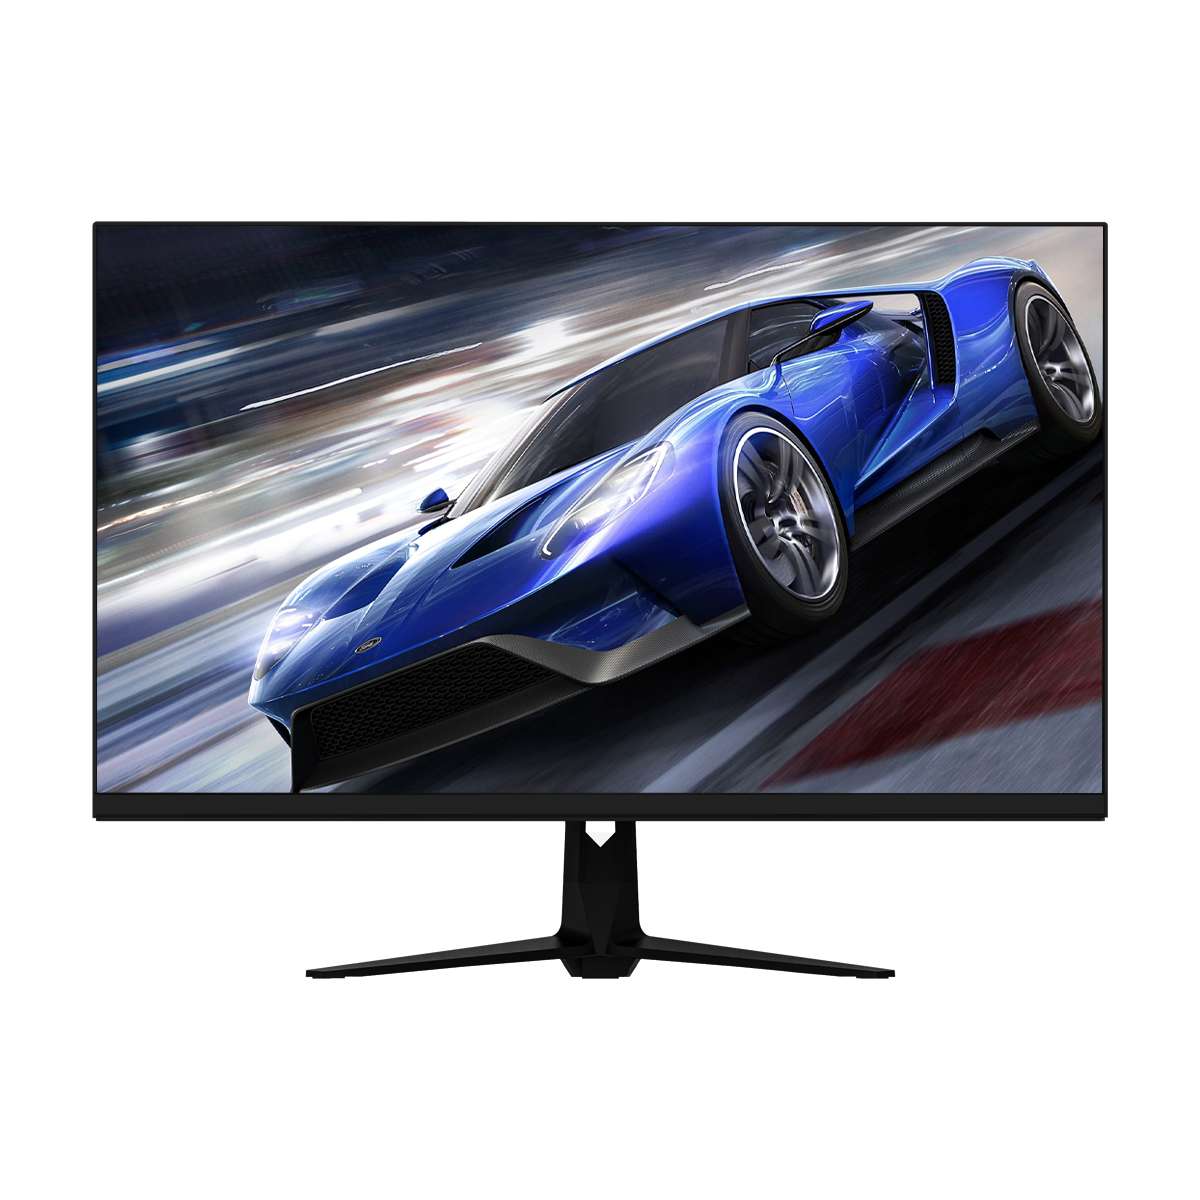 Discover the Best 32 Inch 144hz Monitor for a Superior Gaming Experience